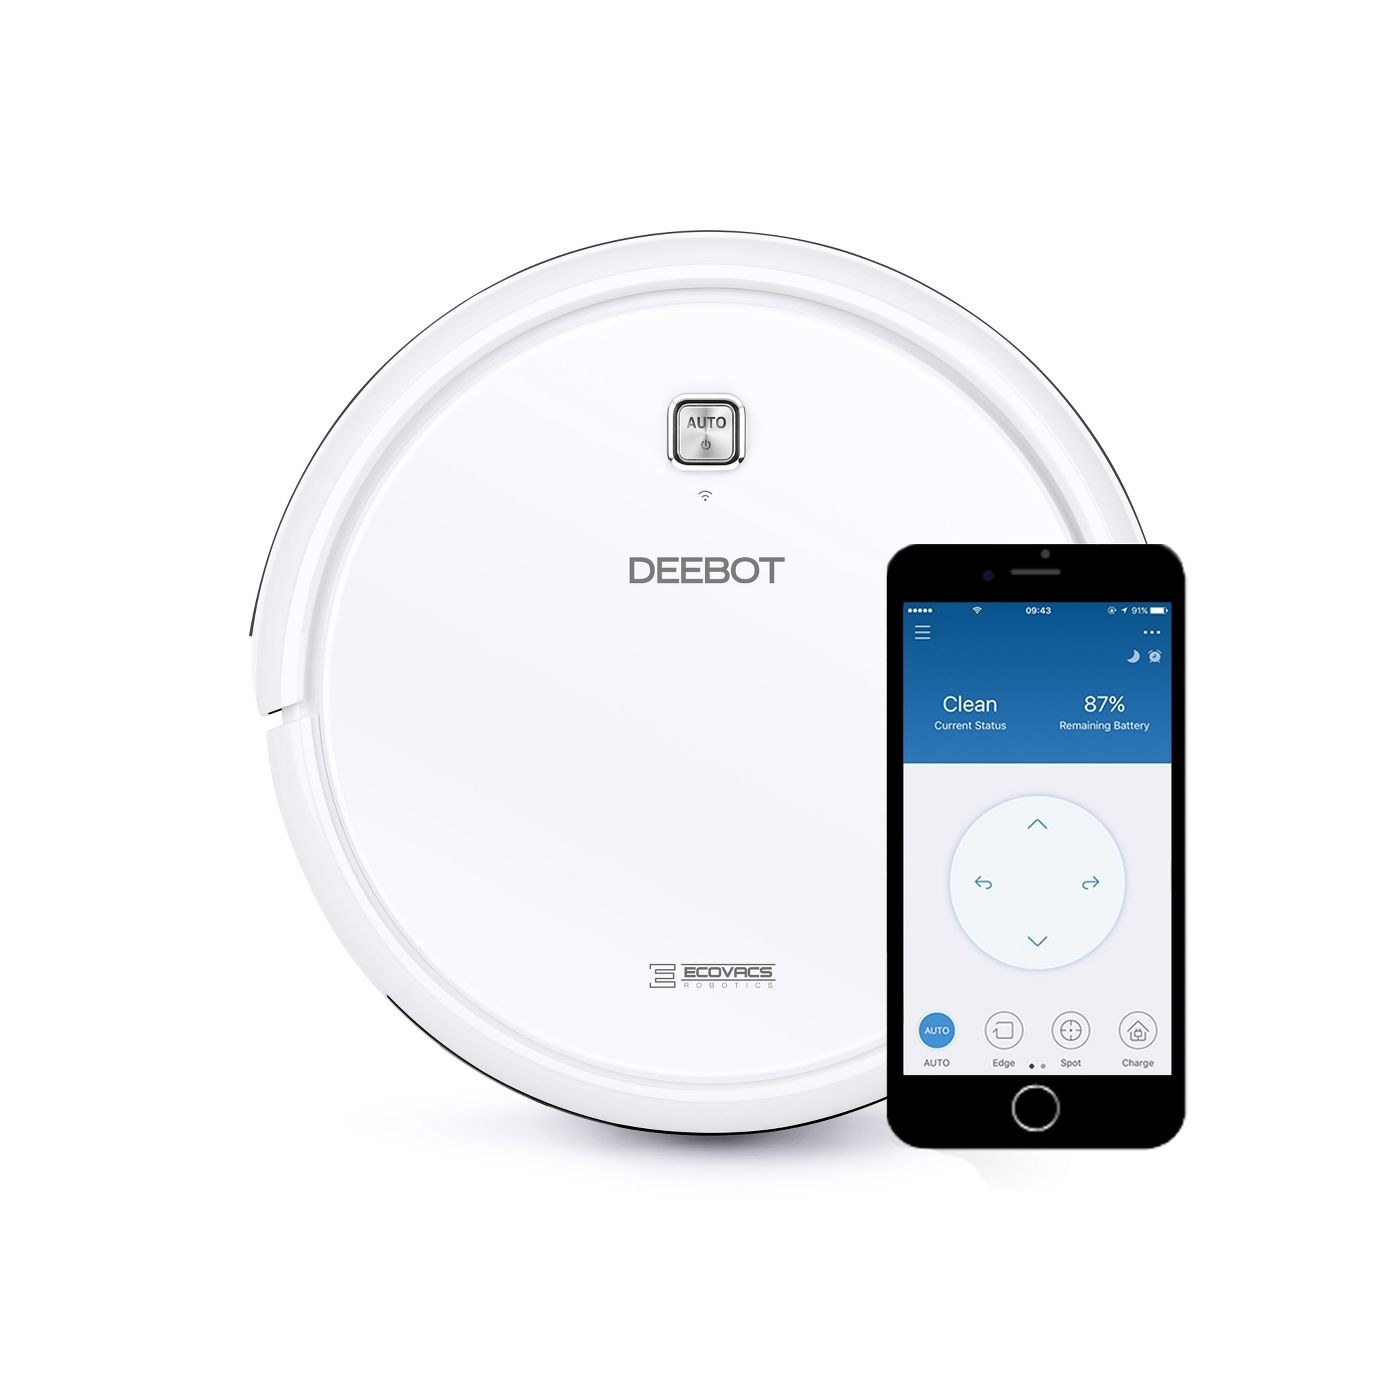 The robot vacuum alongside a smartphone featuring the vacuum&#x27;s app